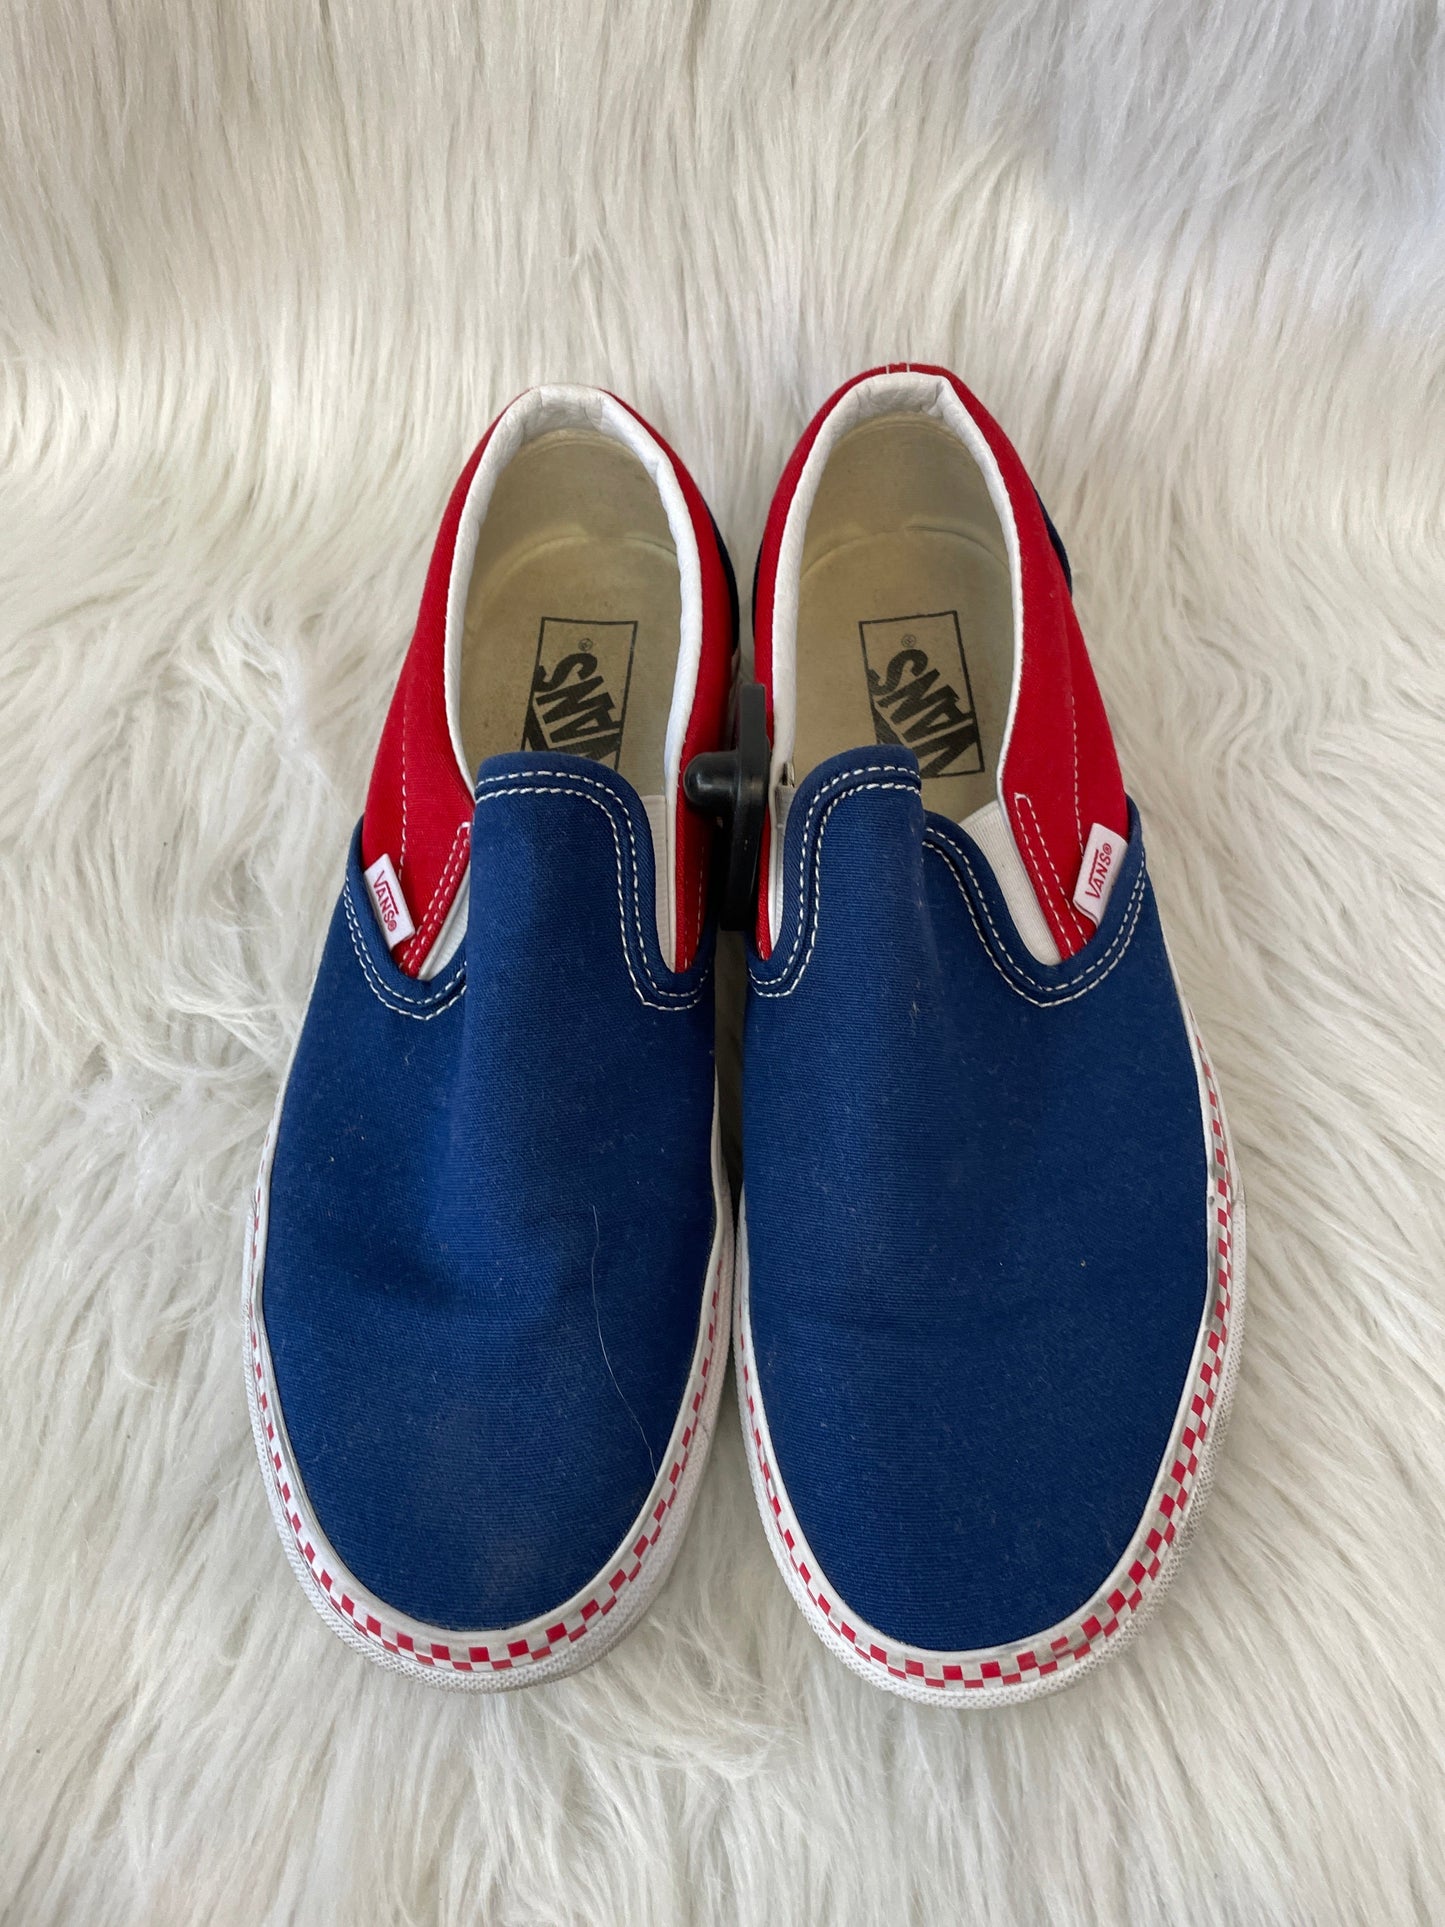 Blue & Red & White Shoes Sneakers Vans, Size 10